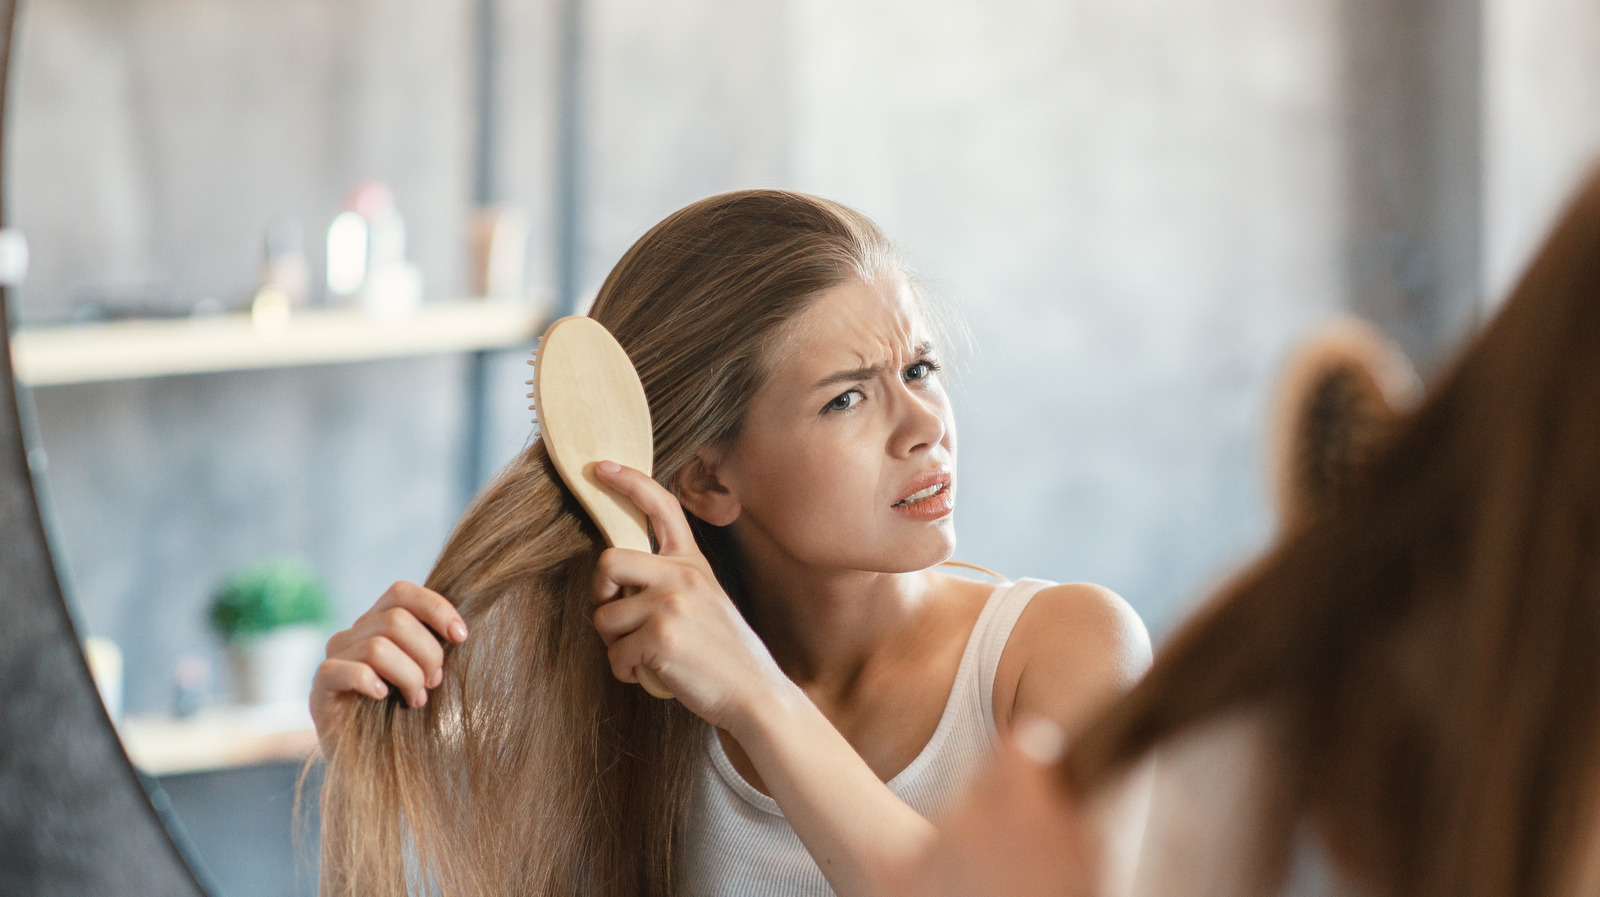 Top Products That Help Battle Dry, Frizzy Hair